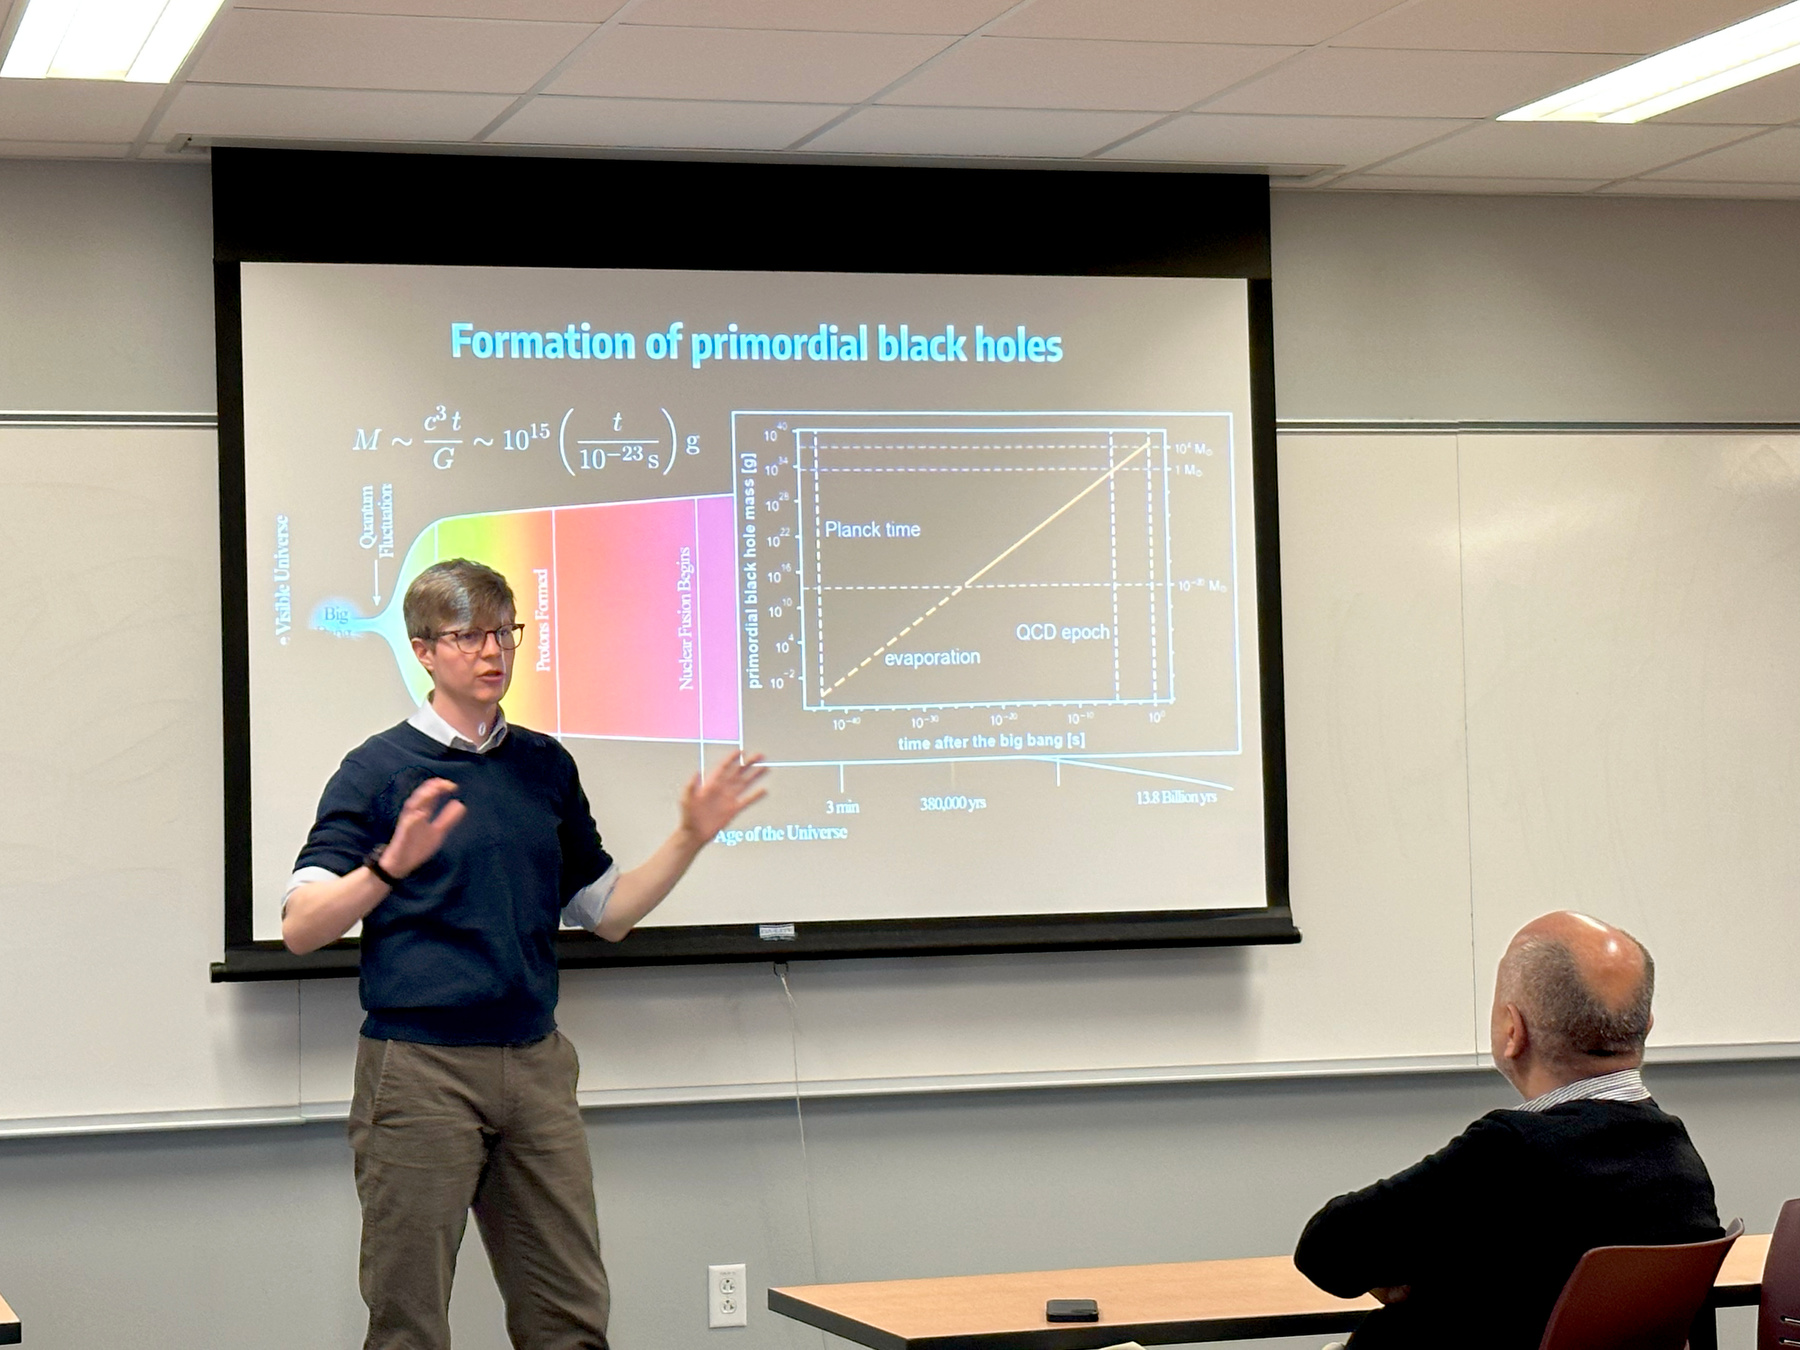 Earl Bellinger, a 2012 SUNY Oswego graduate now a Postdoctoral Research Fellow at the Max Planck Institute for Astrophysics in Germany, visited campus last week to give a guest lecture and seminar to current students. 